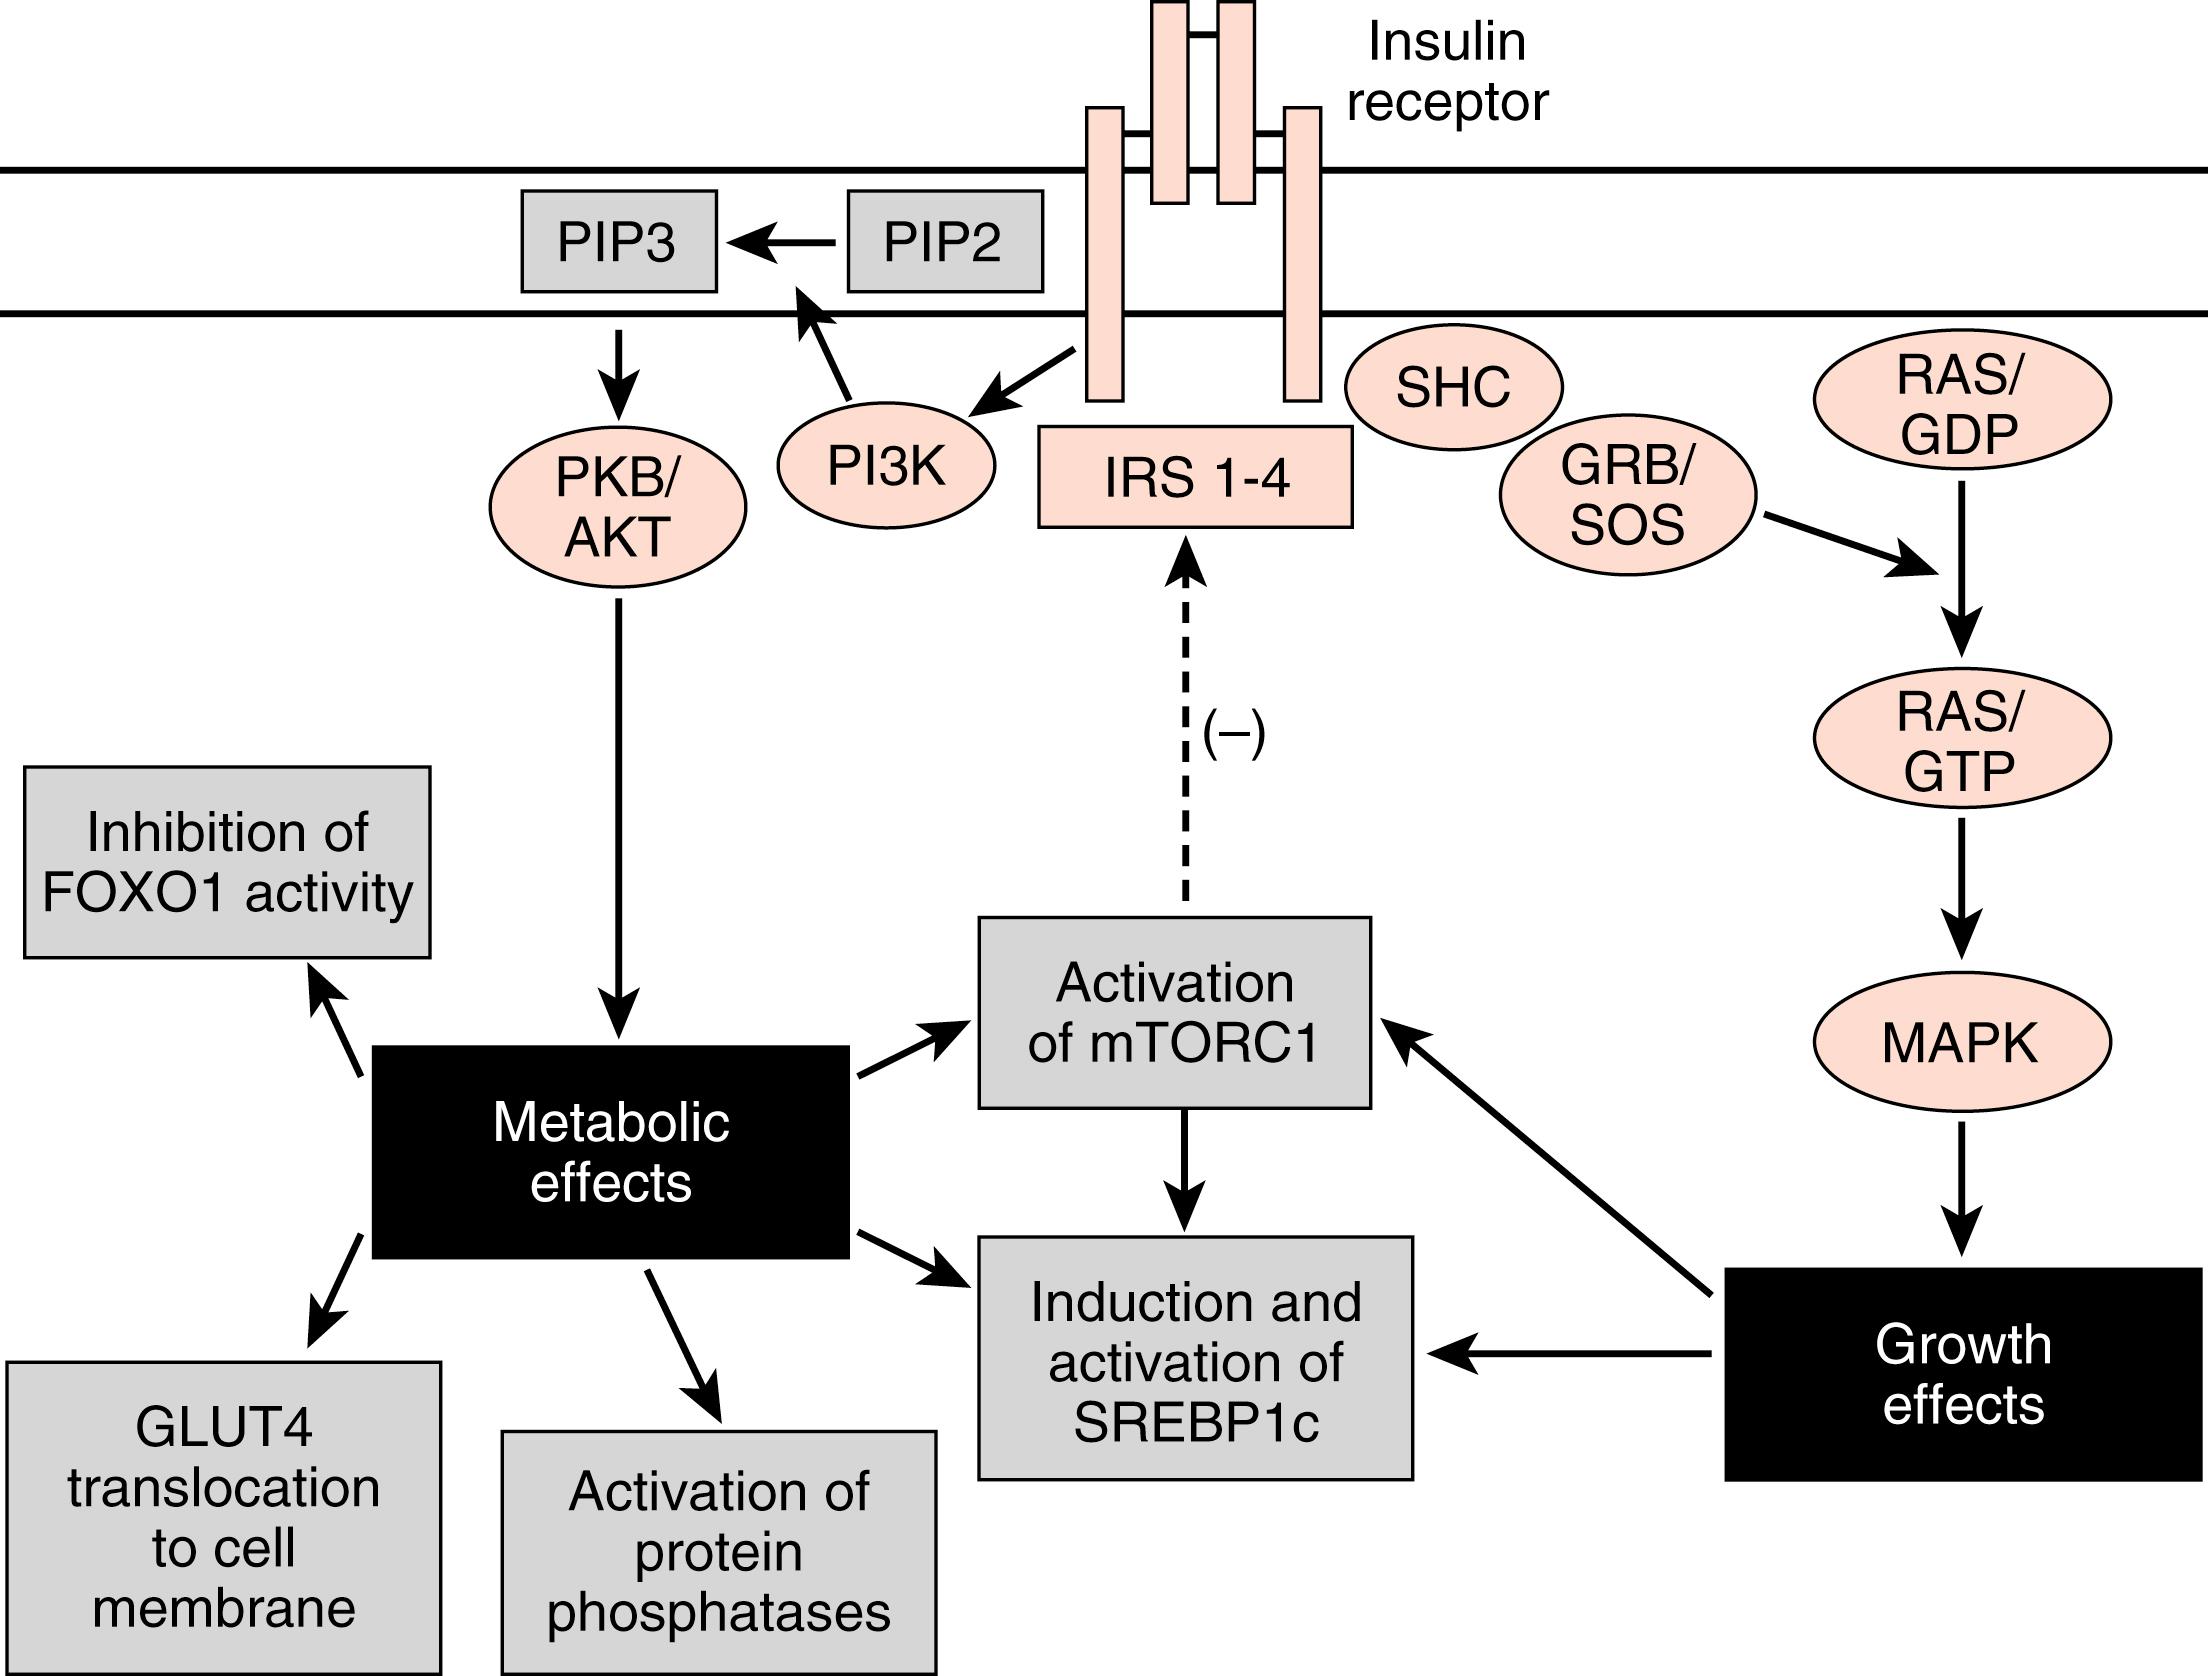 Fig. 3.5, Insulin receptor and postreceptor signaling pathways. See text for abbreviations.